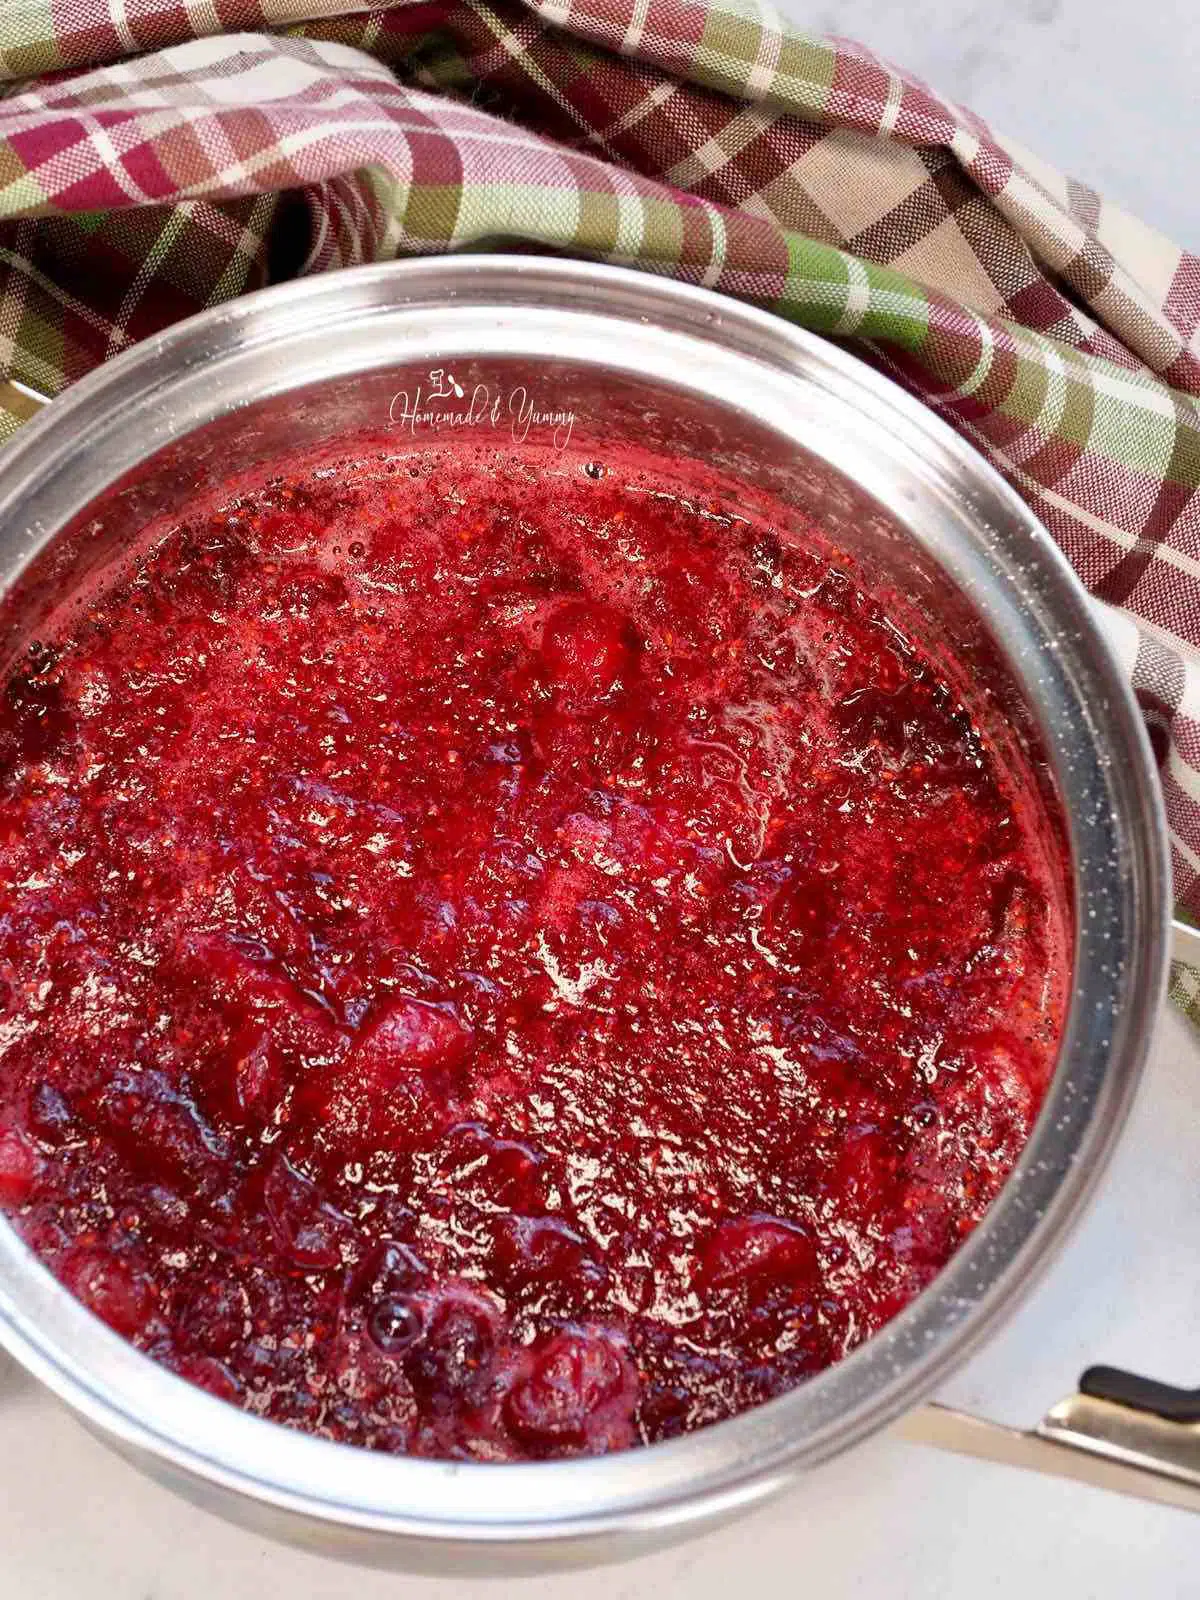 A pot of sauce made from cranberries.